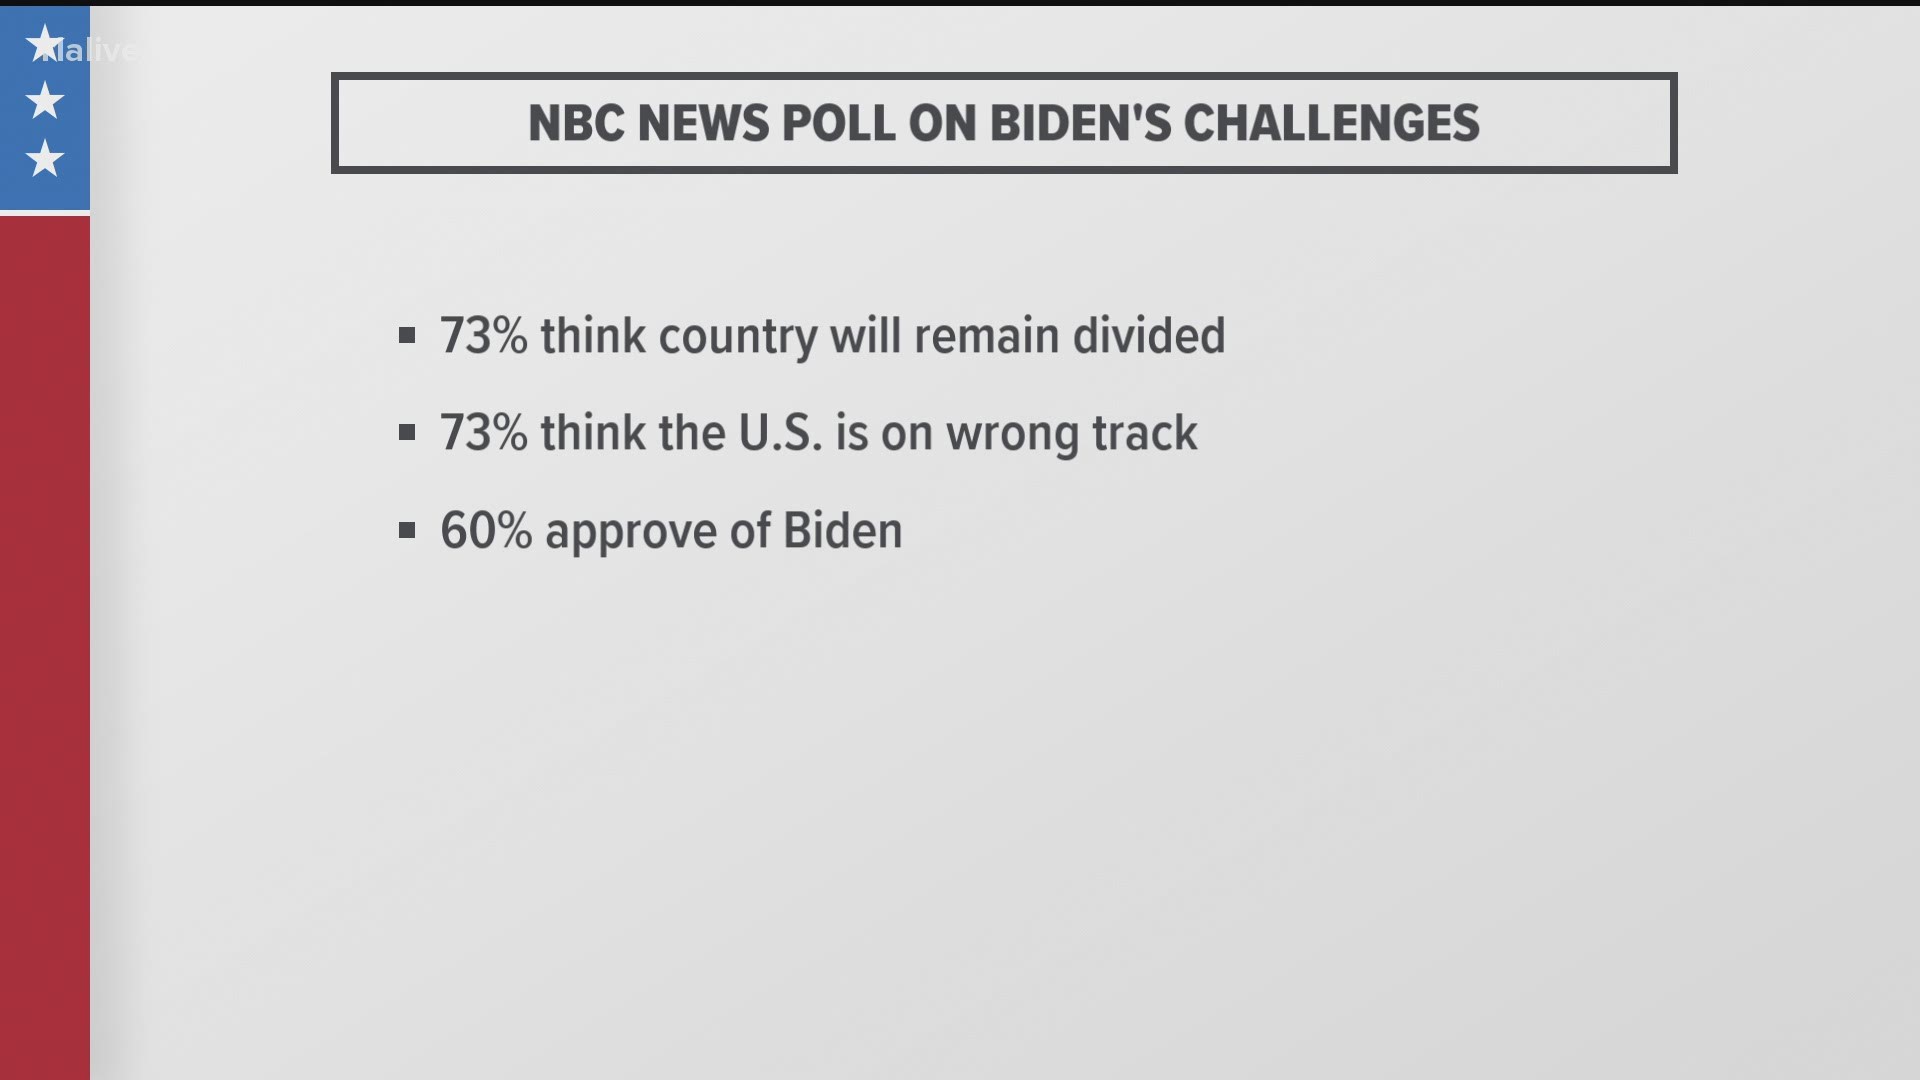 The poll was conducted by NBC News.